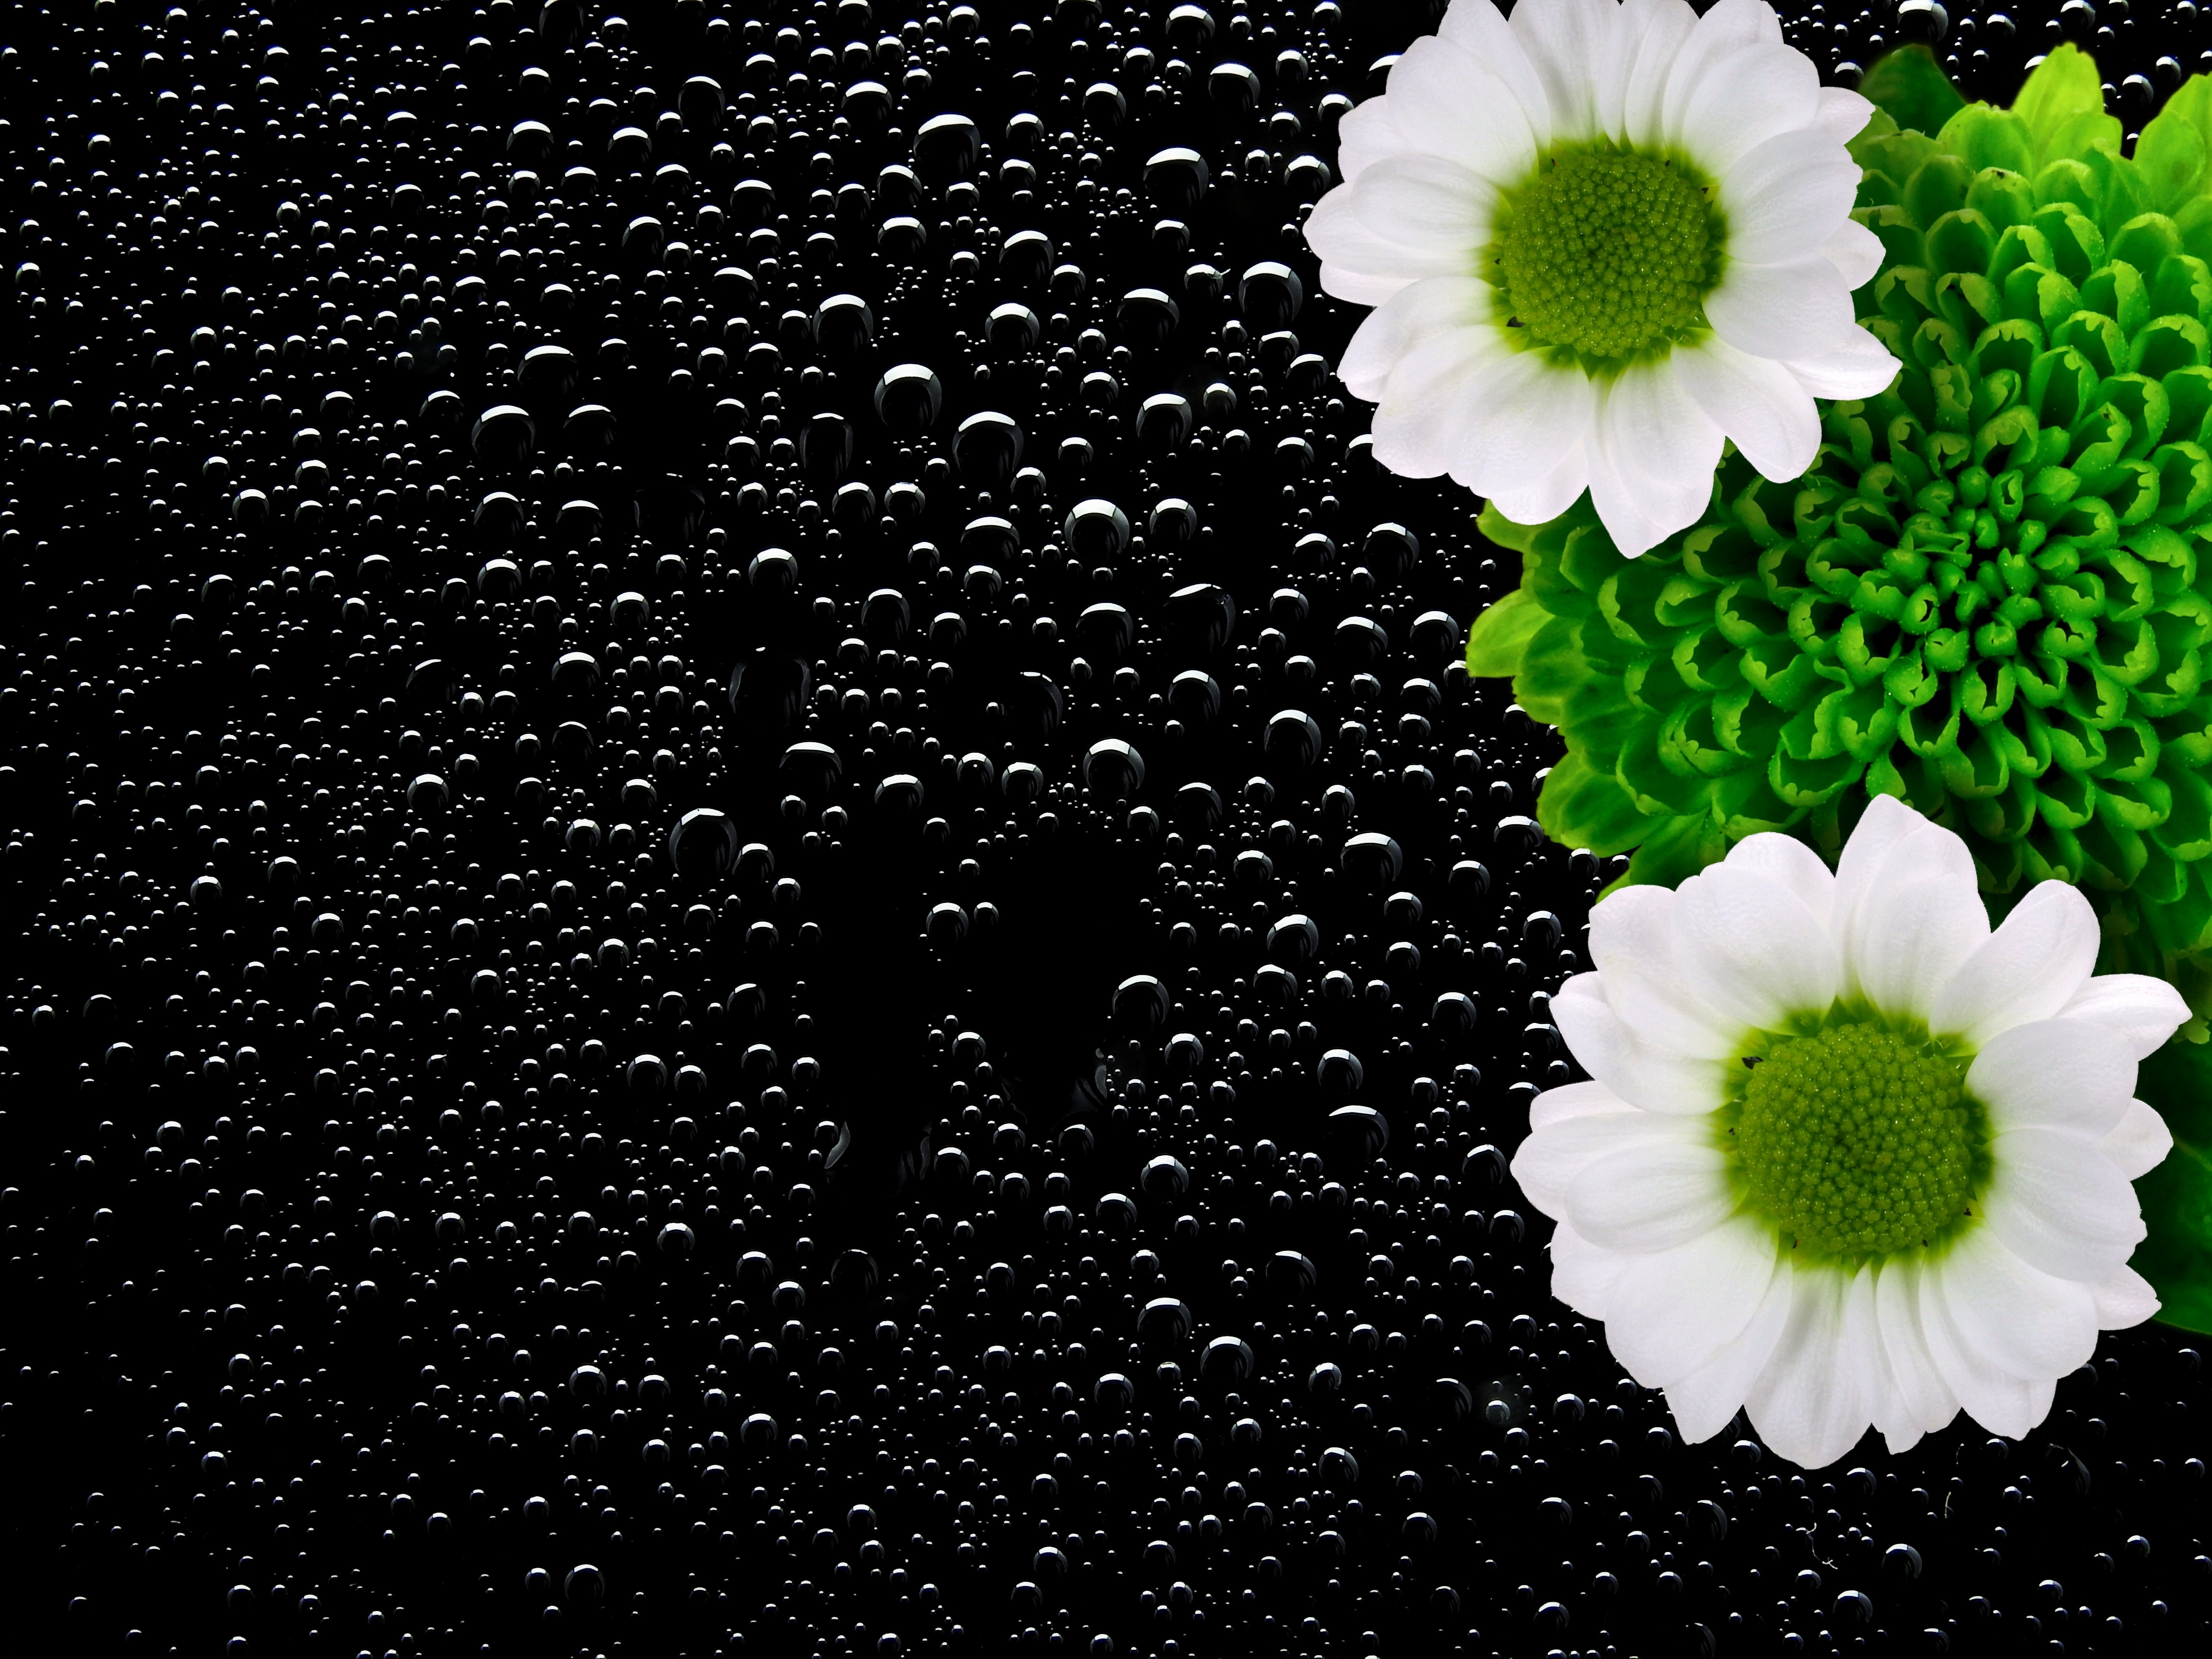 white and green petaled flowers